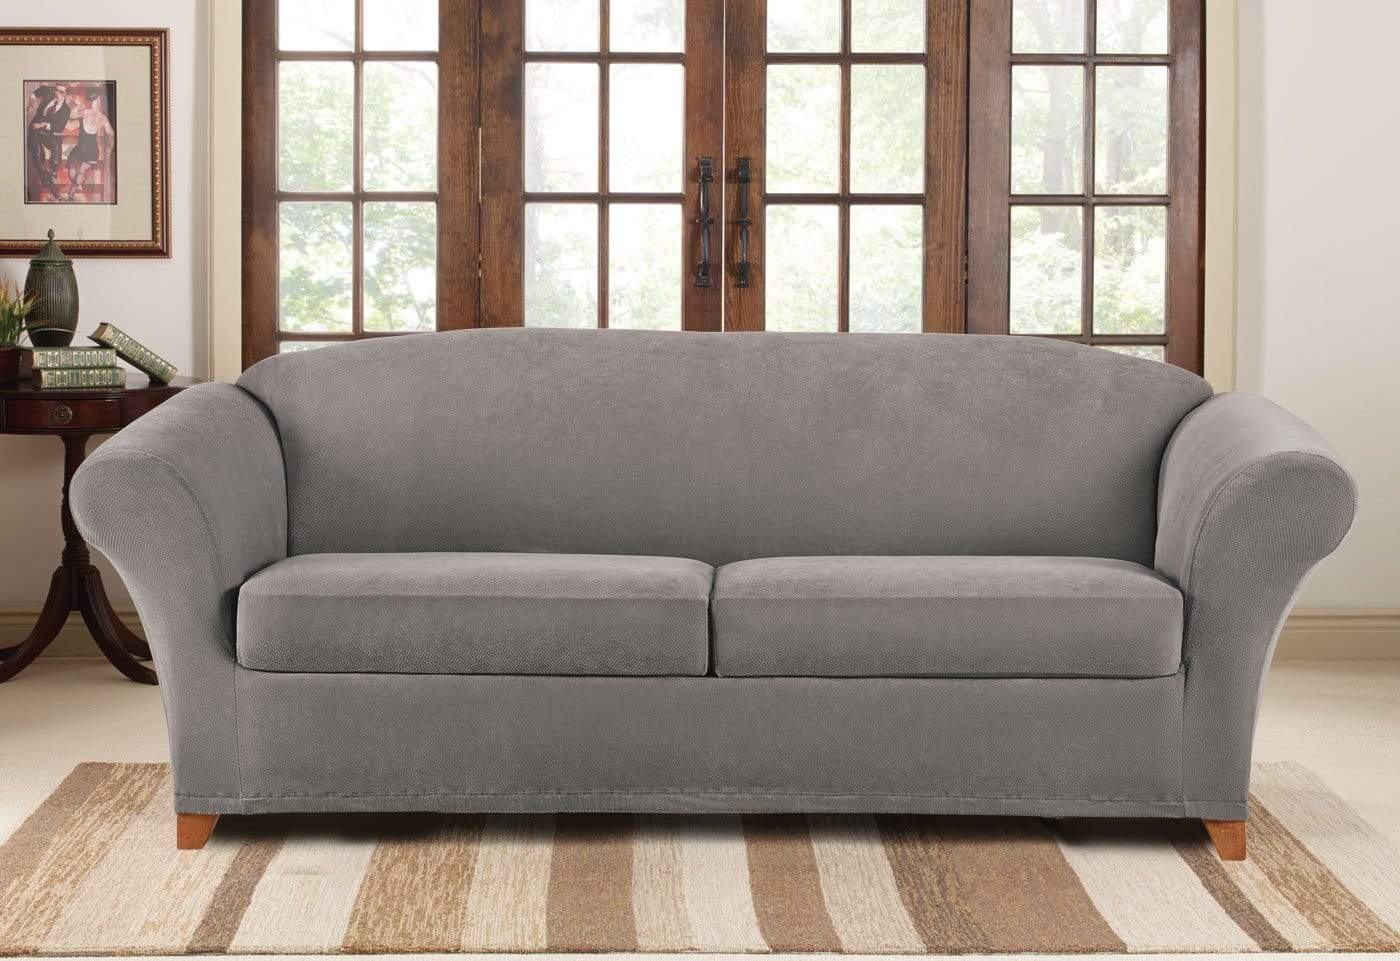 SureFit Stretch Piqué Three Piece Sofa Slipcover   Form-Fitting   Individual Cushion Covers   Machine Washable in Flannel Grey